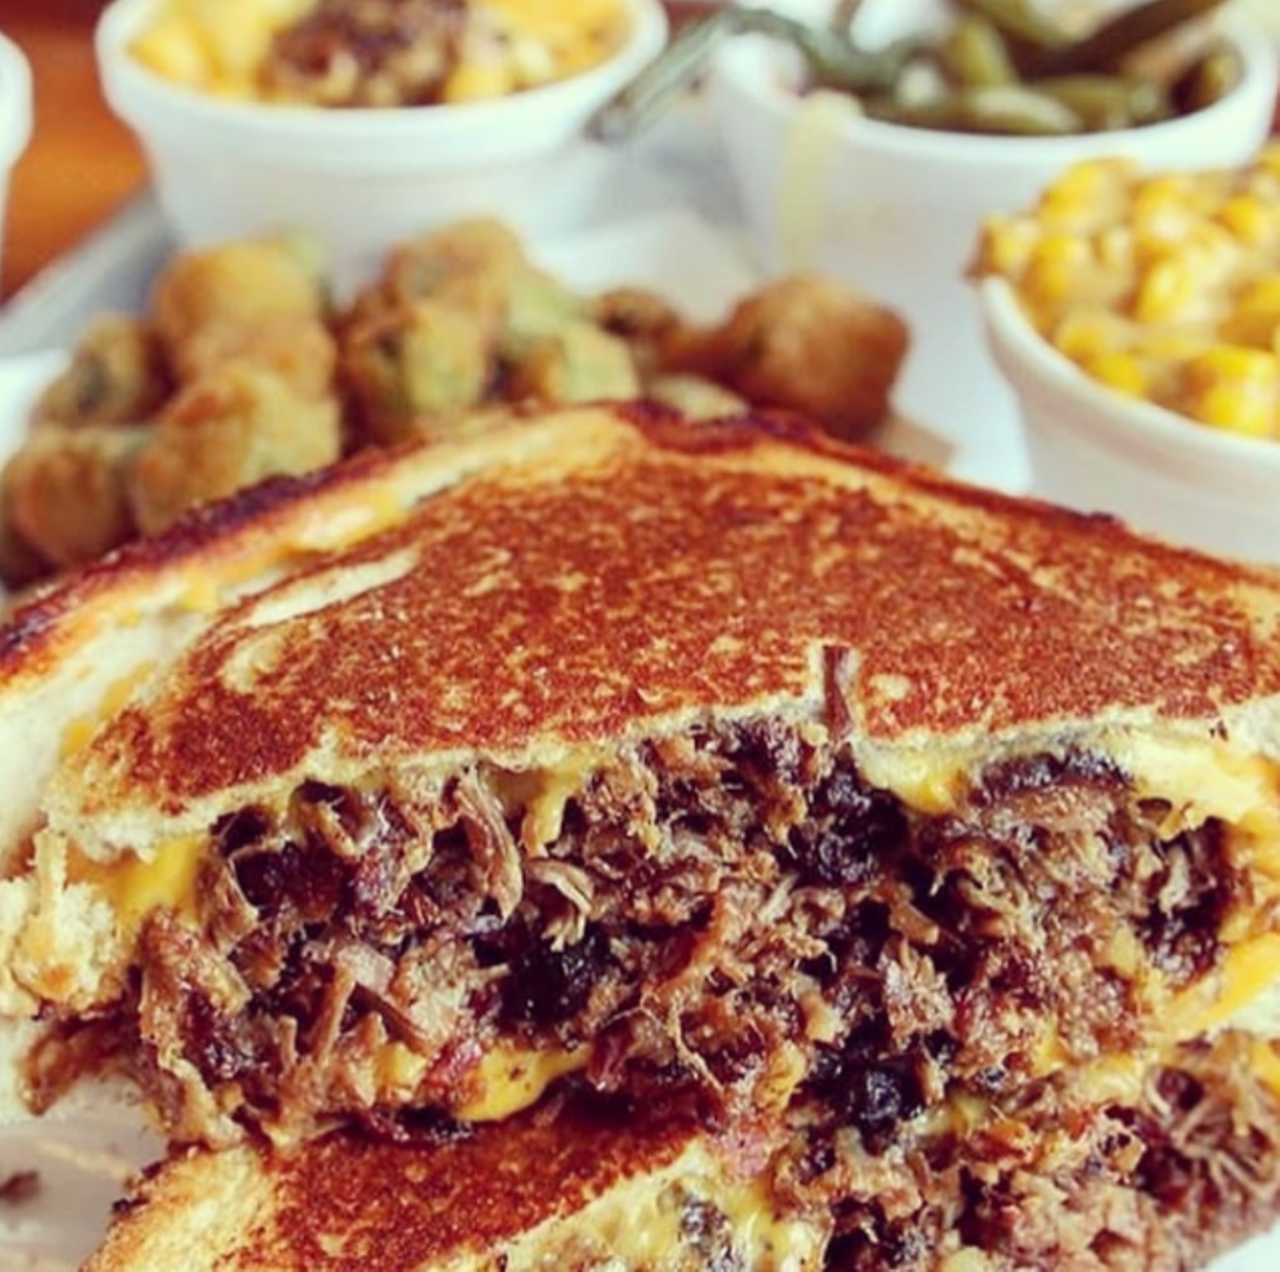 Smoke Shack
3714 Broadway St., (210) 957-1430,
smokeshacksa.com 
Look familiar? As seen on Guy Fieri’s  Diners, Drive-ins and Dives, Smoke Shack is the southern barbecue and kitchen whose menu is capable of satiating any hungry Texan (or tourist).
Photo via Instagram / smokeshack